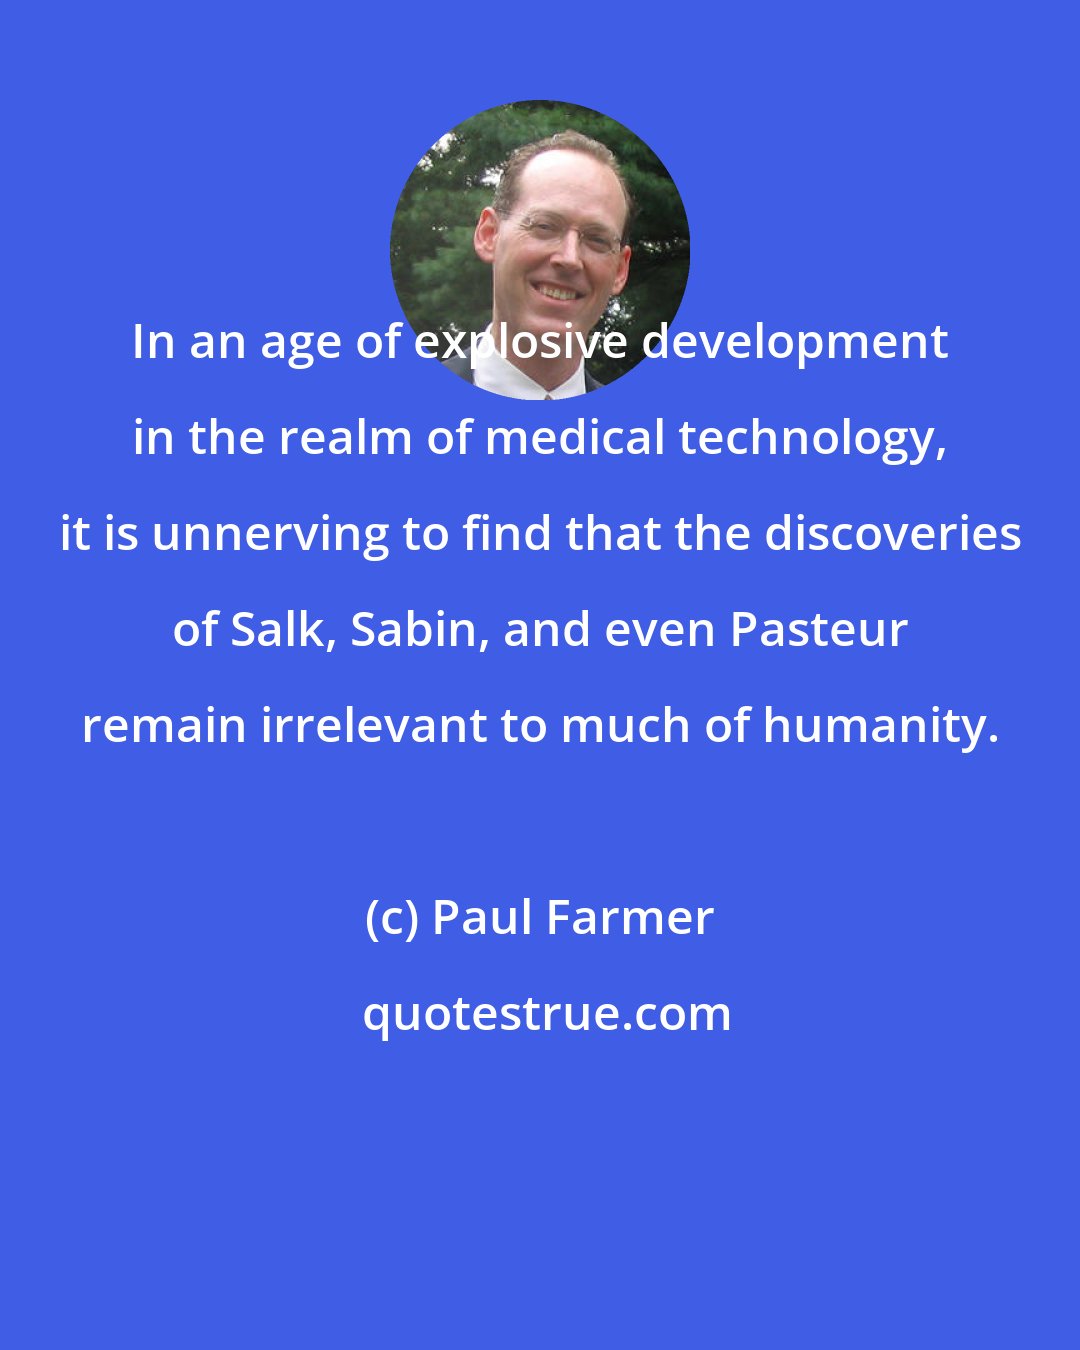 Paul Farmer: In an age of explosive development in the realm of medical technology, it is unnerving to find that the discoveries of Salk, Sabin, and even Pasteur remain irrelevant to much of humanity.